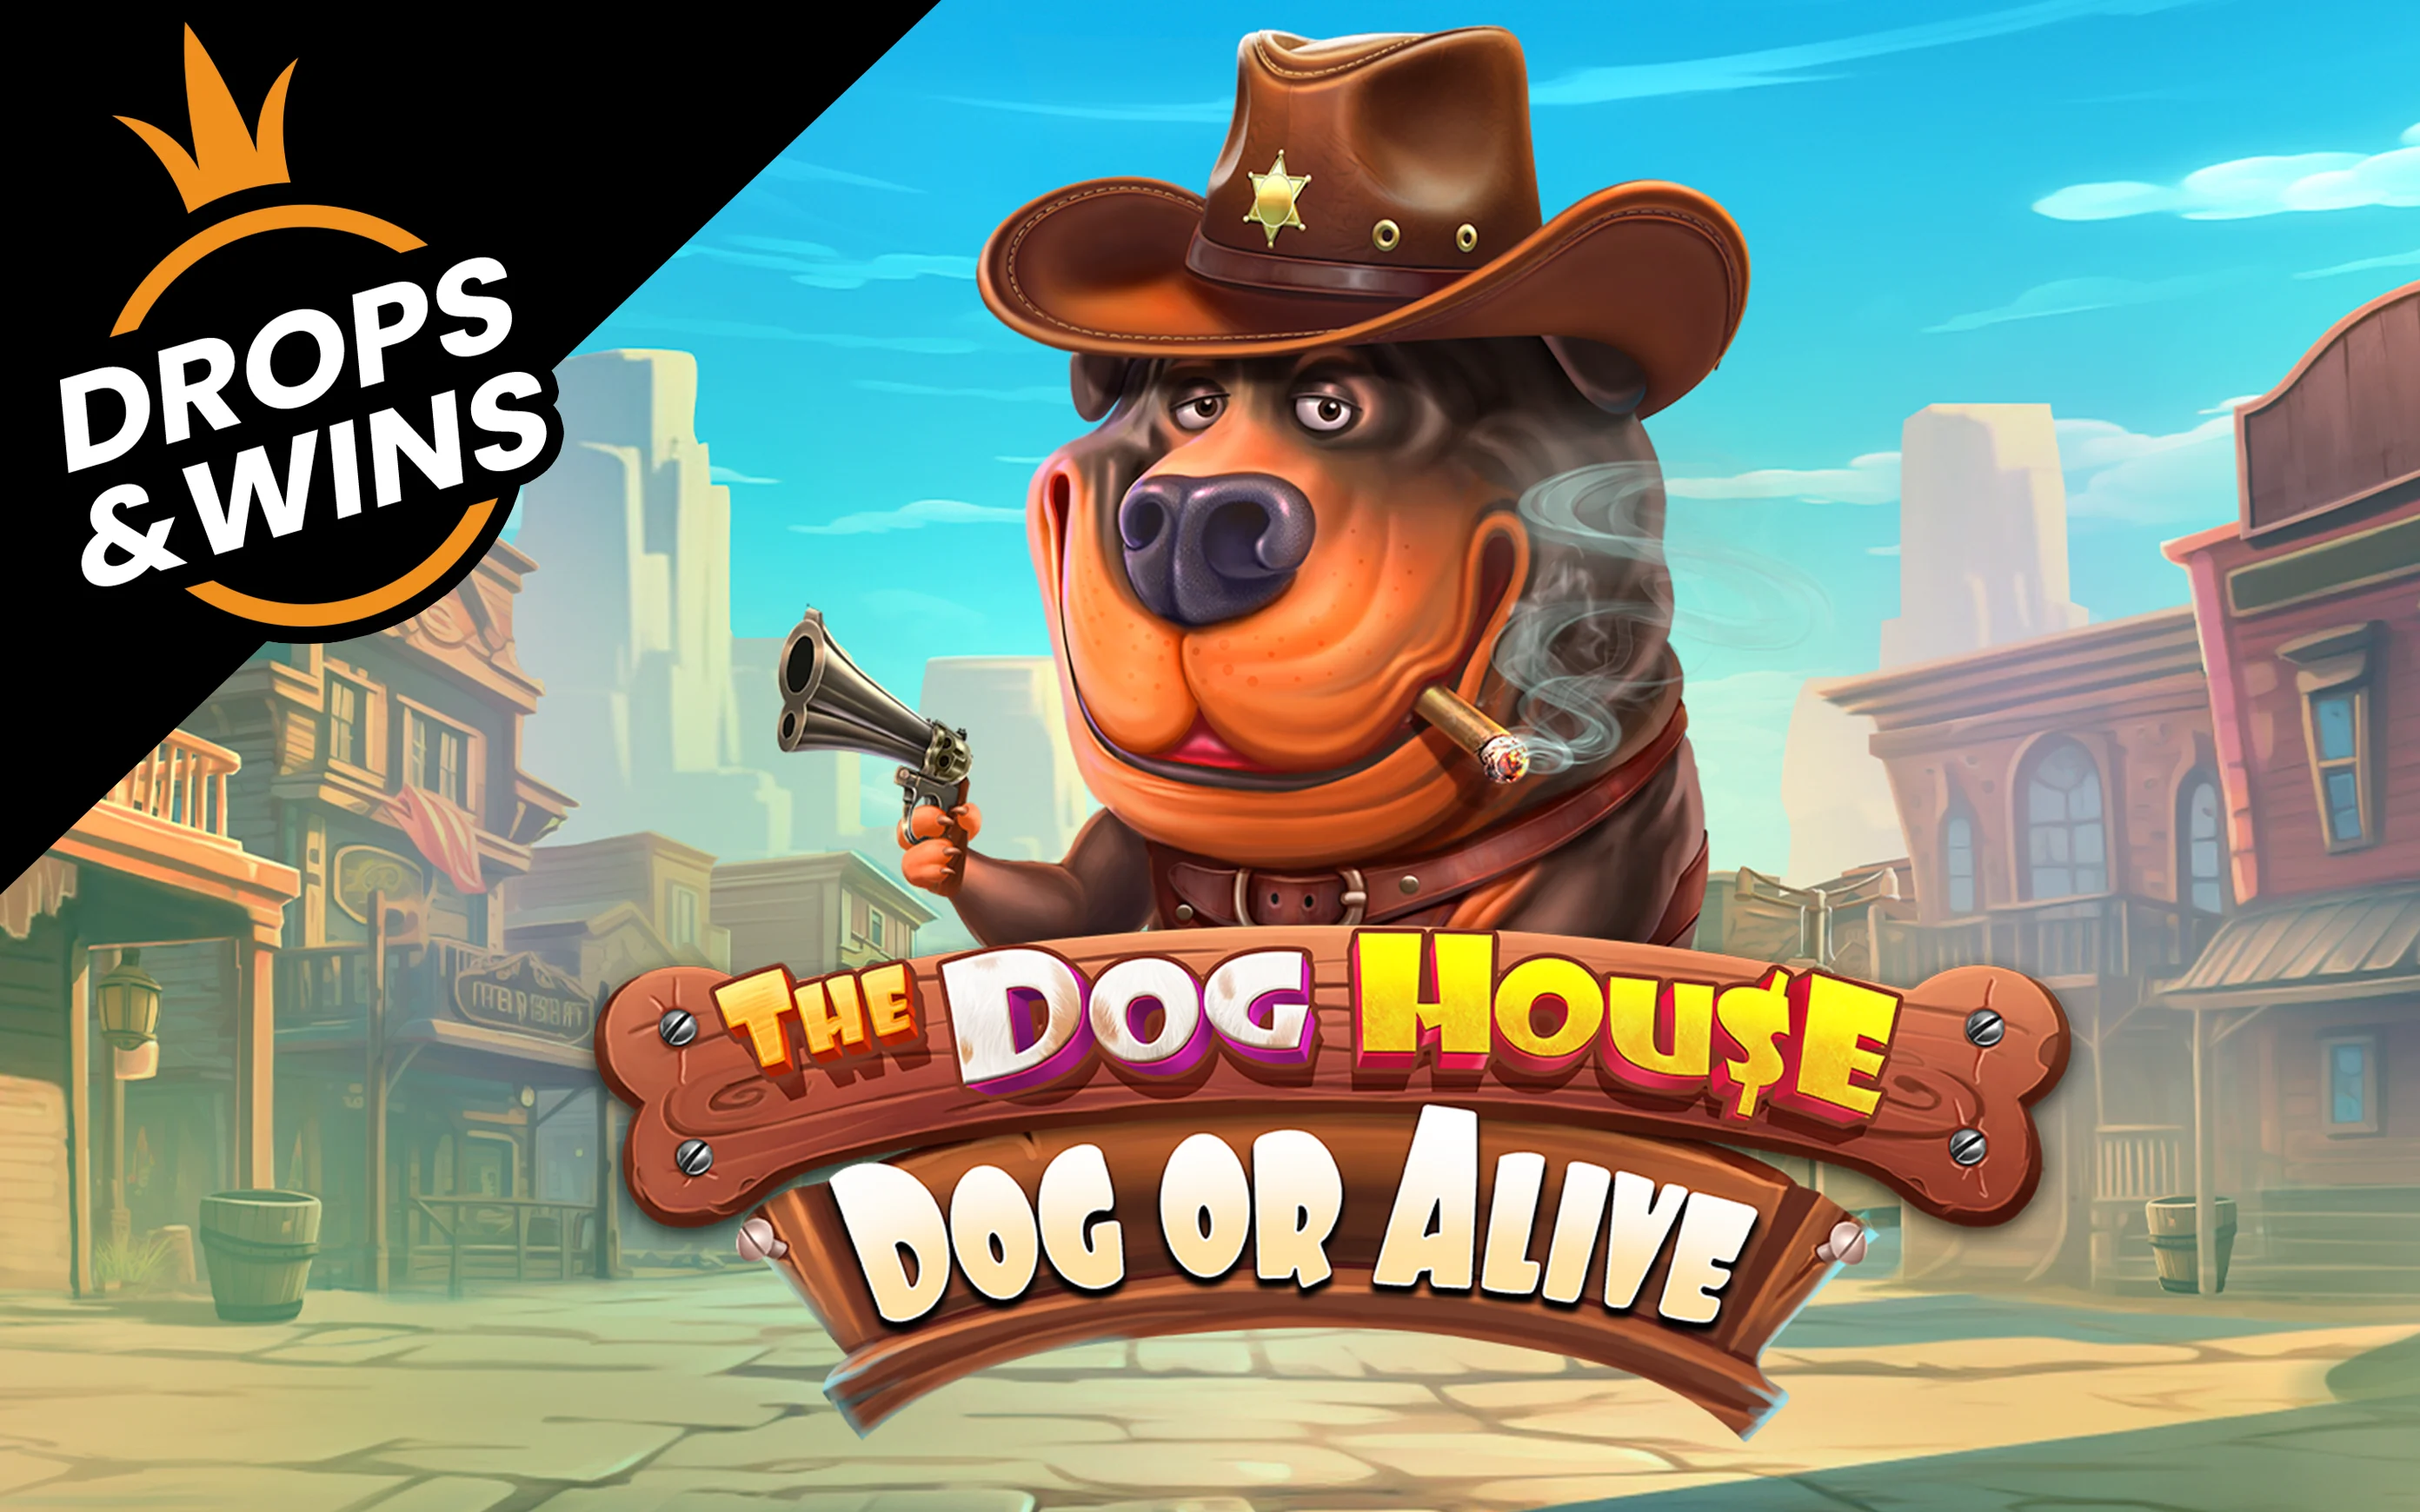 Jogue The Dog House – Dog or Alive no casino online Starcasino.be 